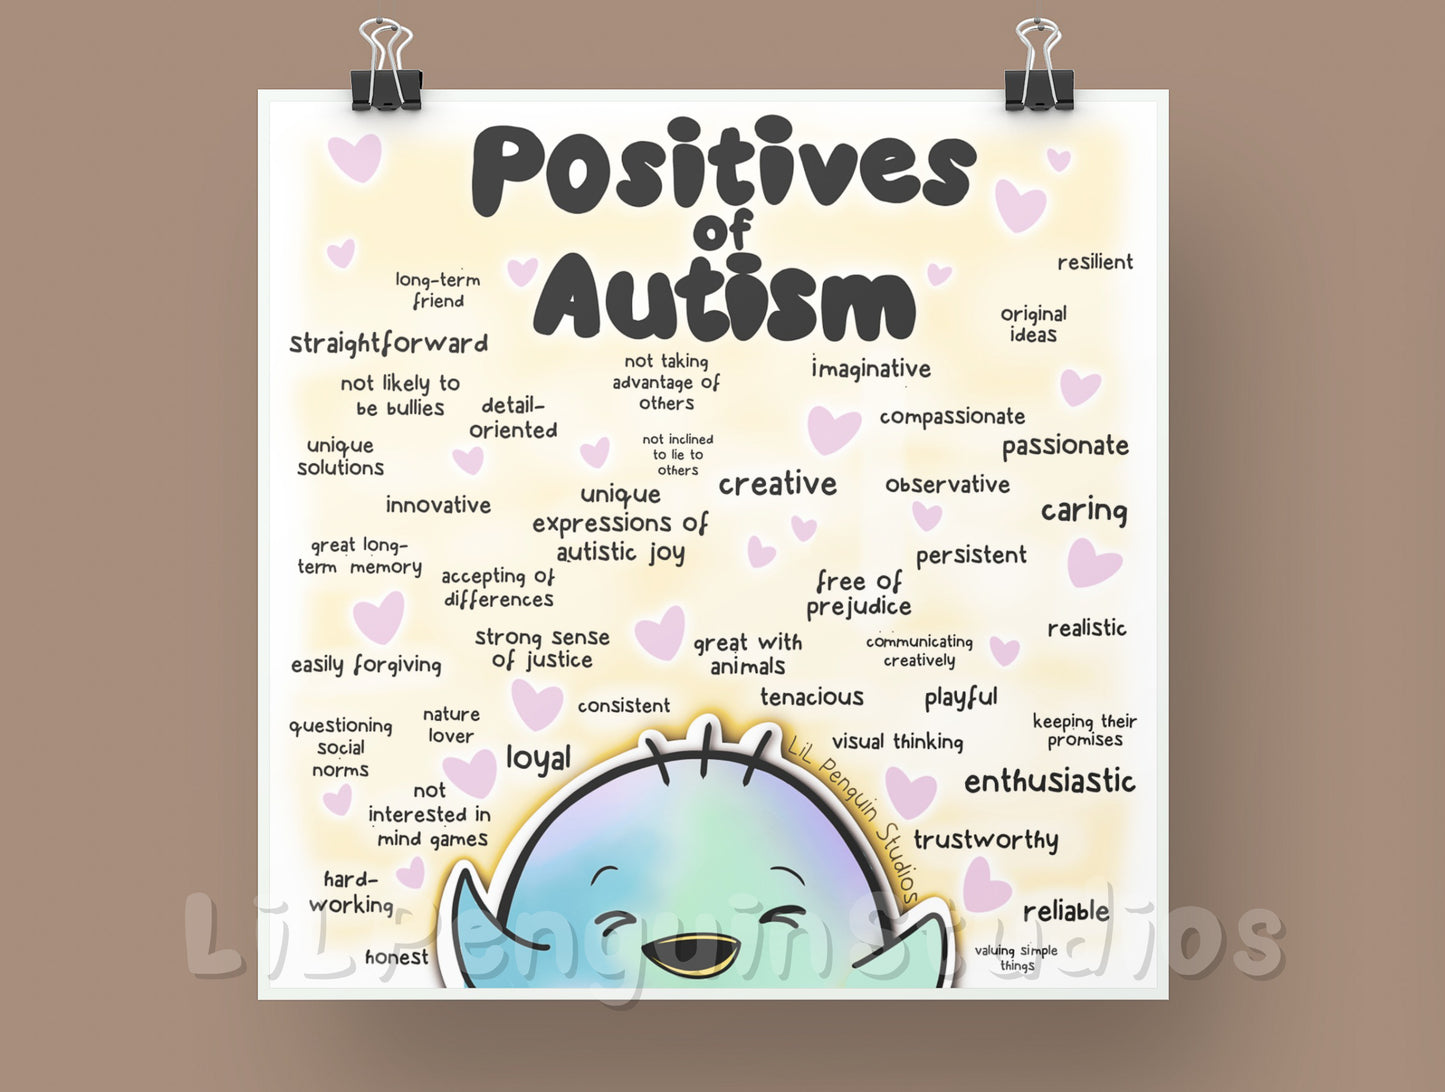 Positives oF Autism poster hand drawn by an autistic artist. 